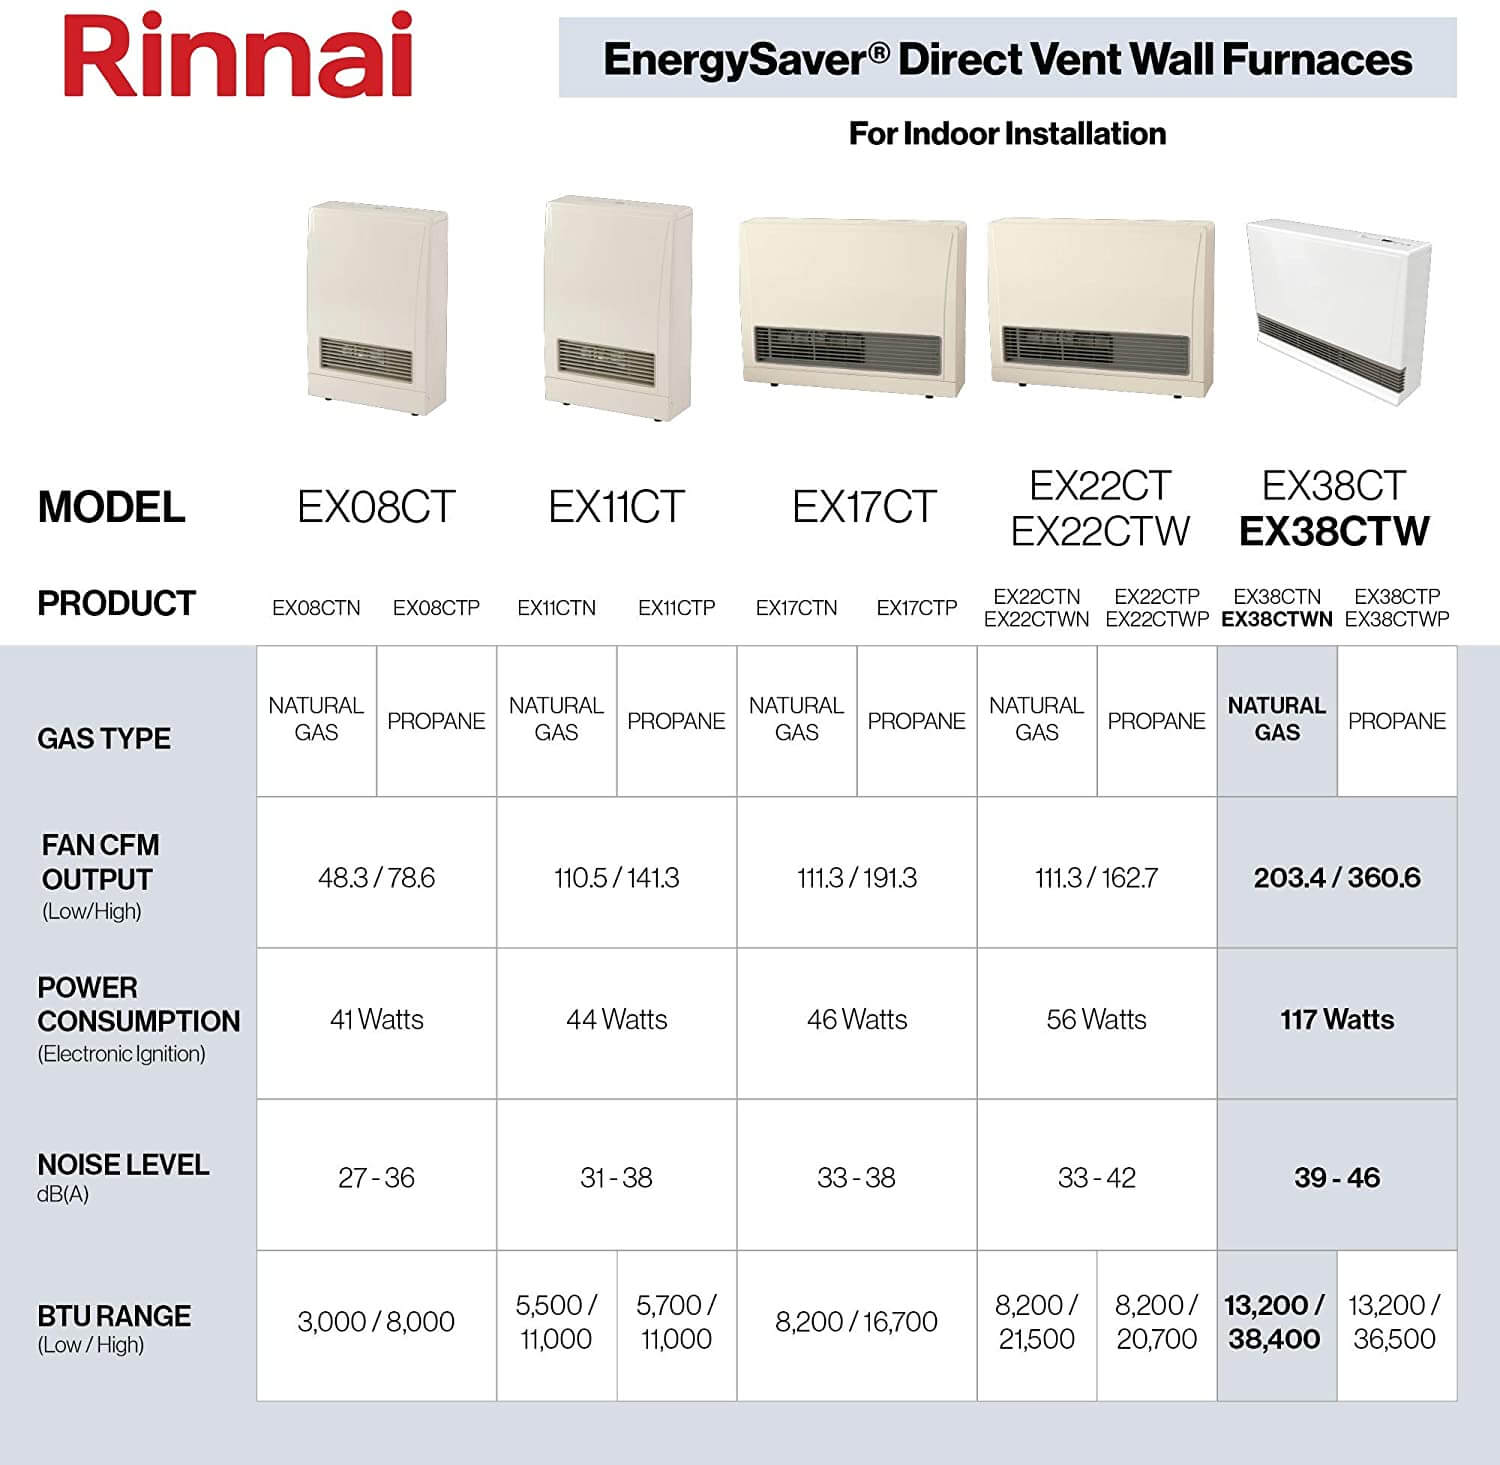 Rinnai EX38CTW Direct Vent Wall Furnace Heater C-Series Wall Thermostat